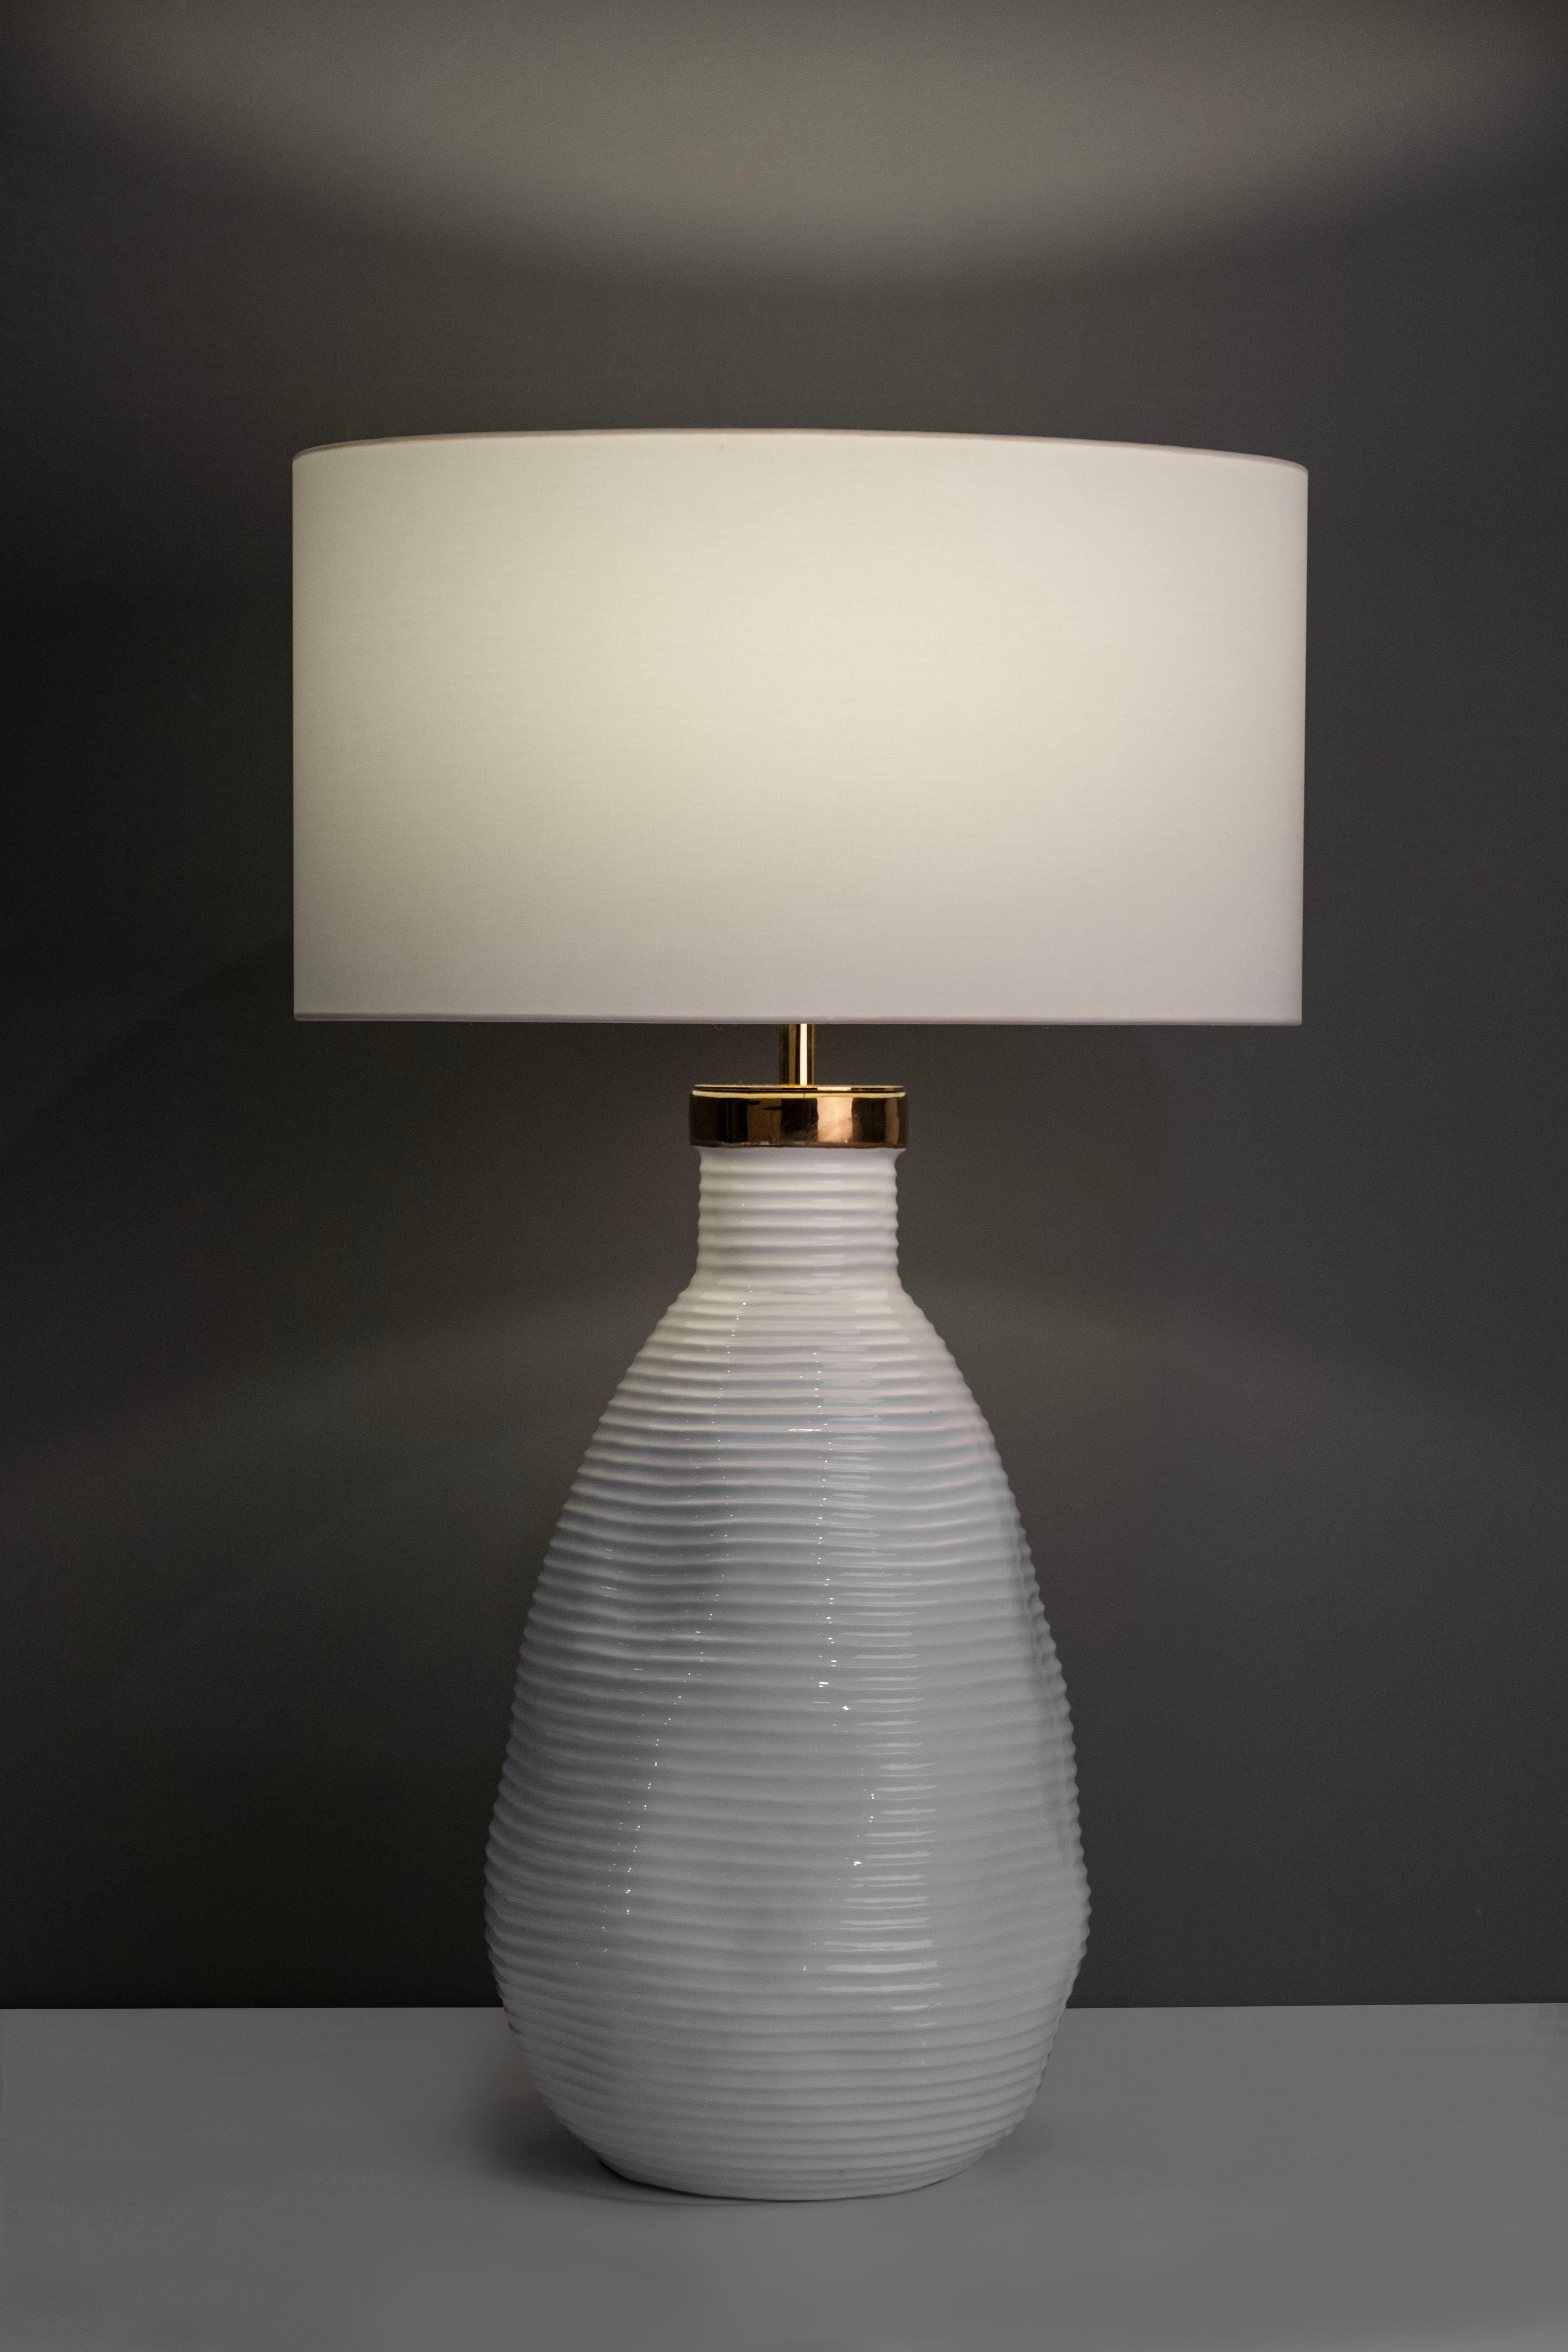 Candeias table lamp, Modern Collection, Handcrafted in Portugal - Europe by GF Modern.

The Candeias table lamp creates a subliminal ambience for extraordinary living. The base in white glazed ceramic with a gold detail on top harmonizes seamlessly